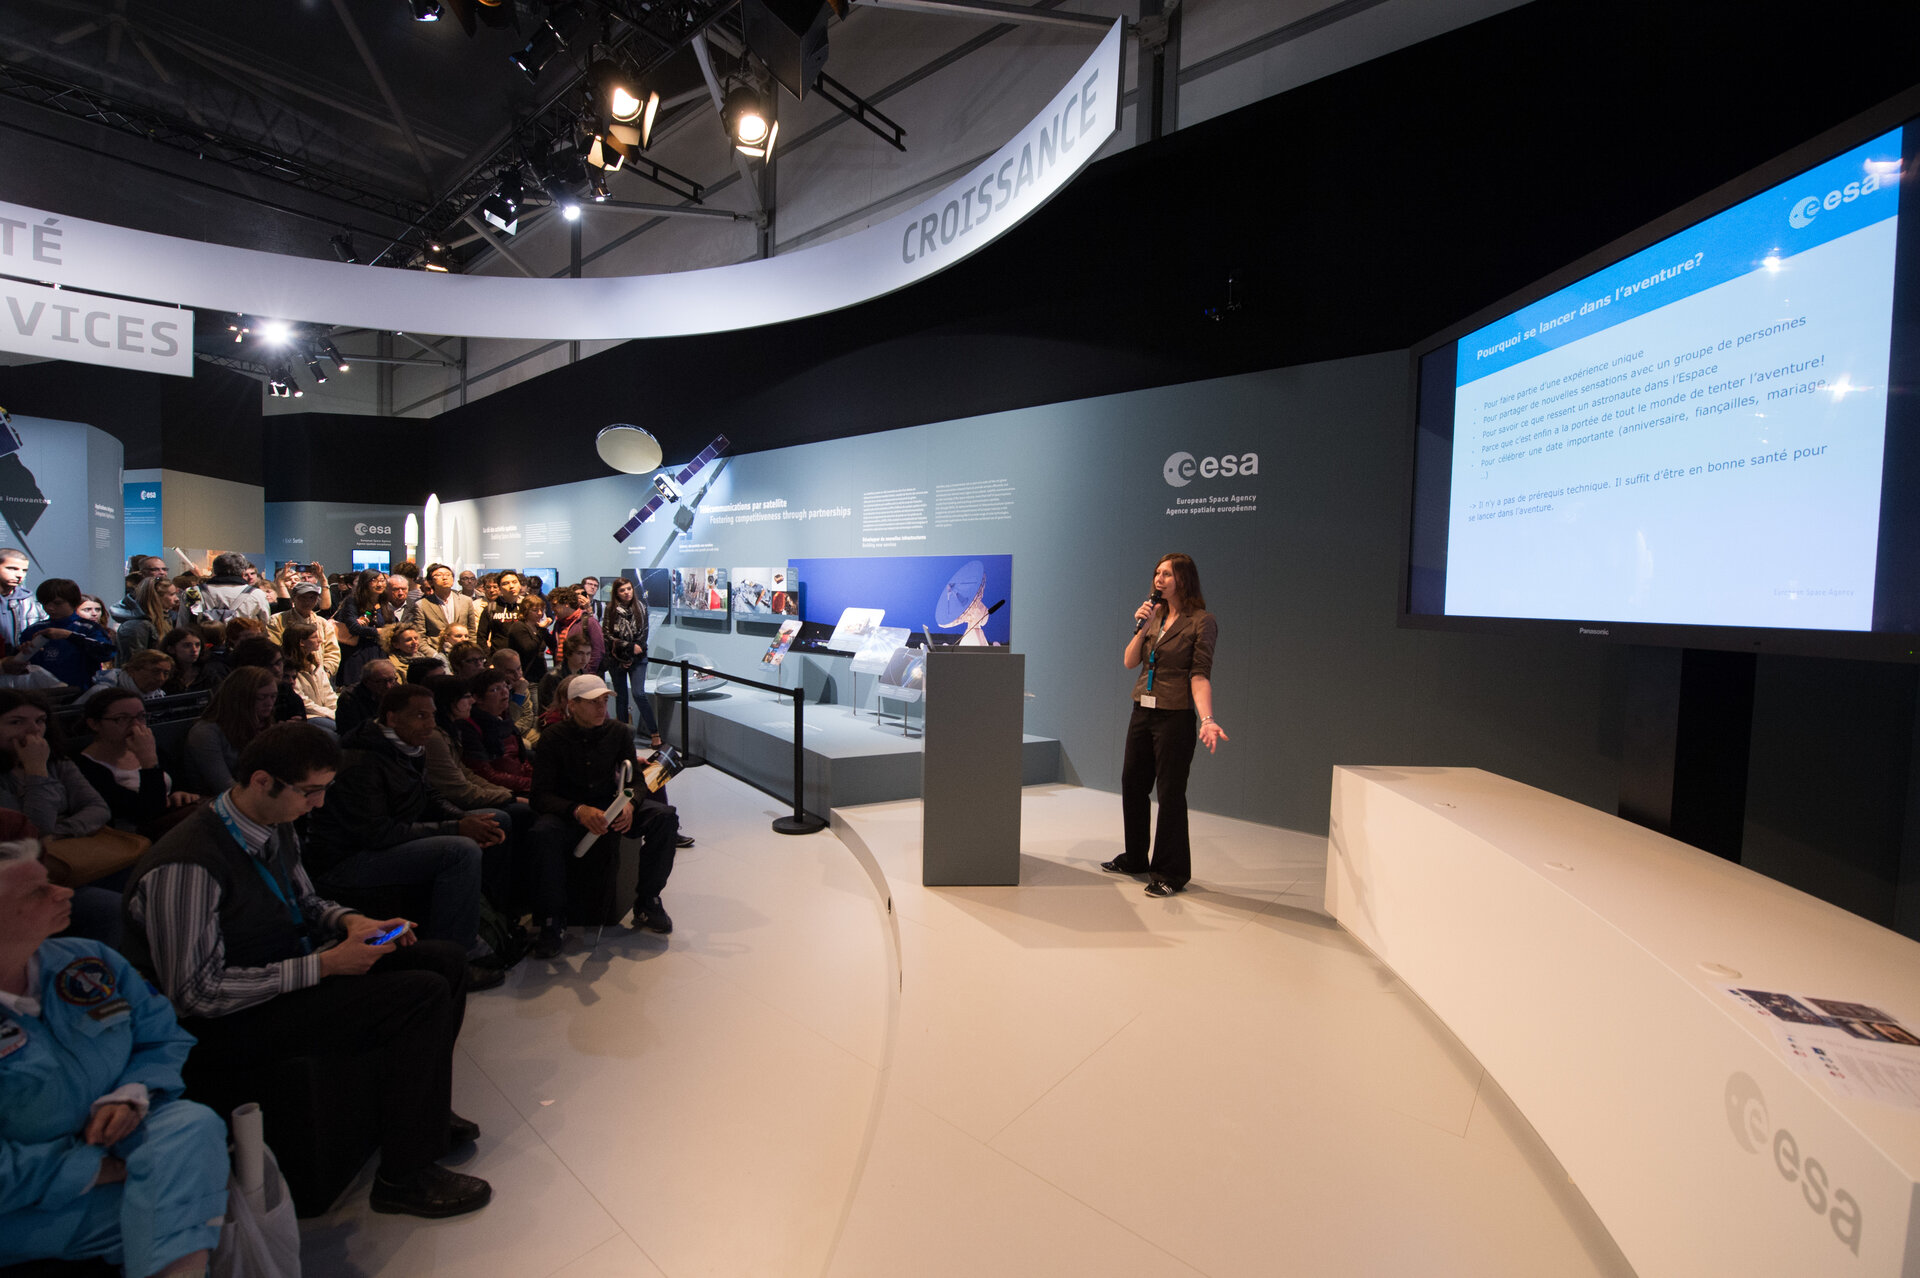 Public during the "Flying in Zero G" lively presentation